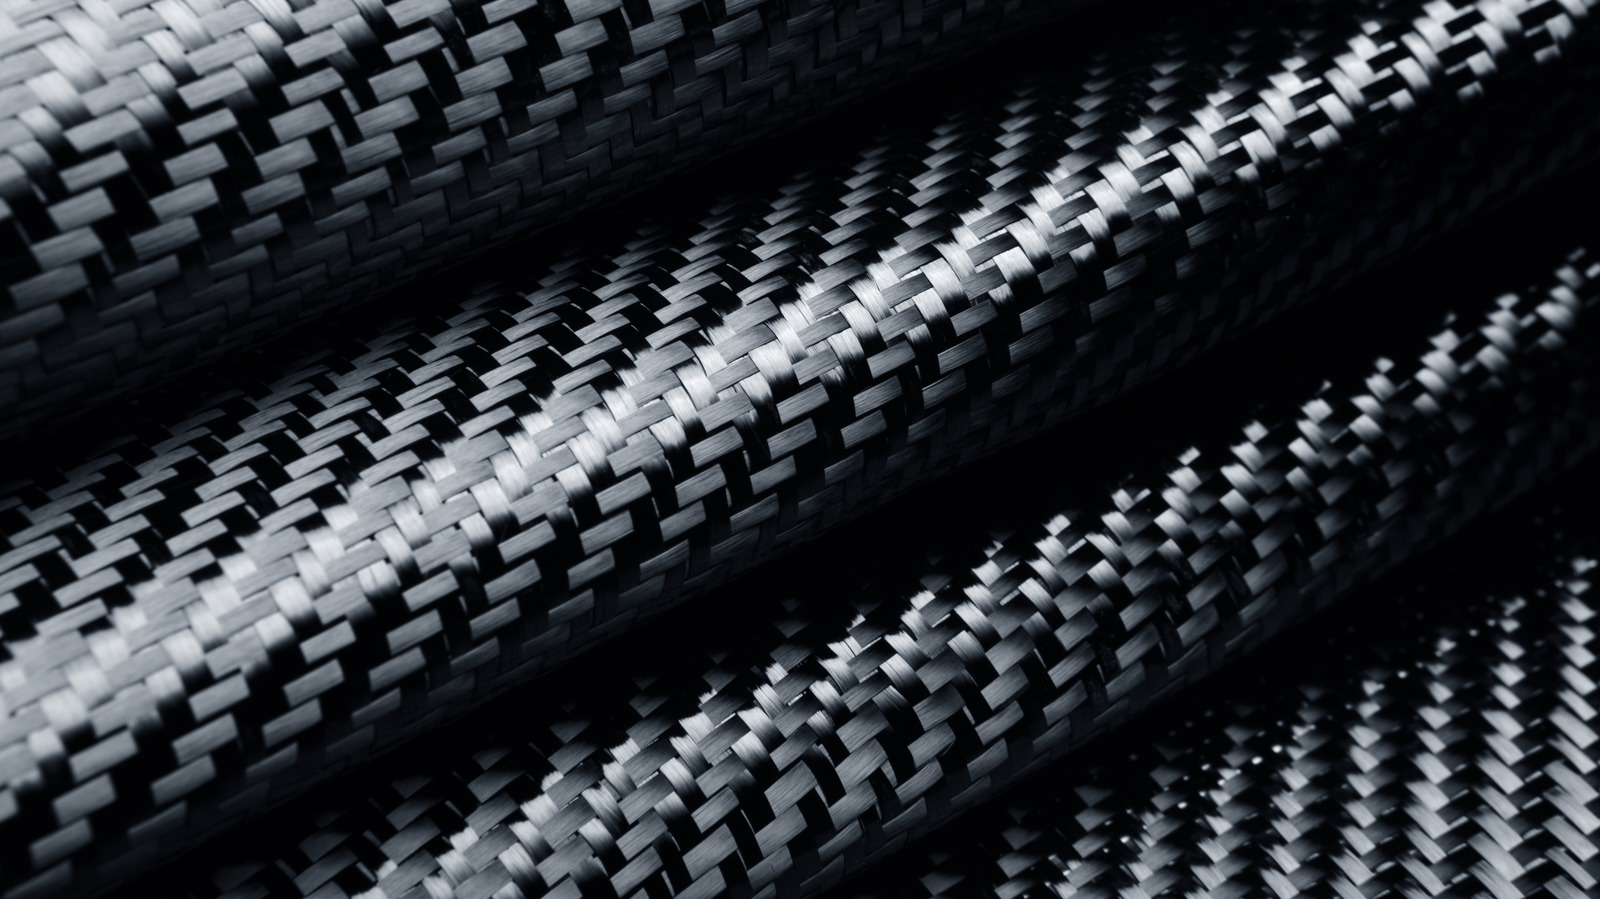 Carbon Fiber Explained: What It Is, How It Works, And Why It’s So Expensive – SlashGear